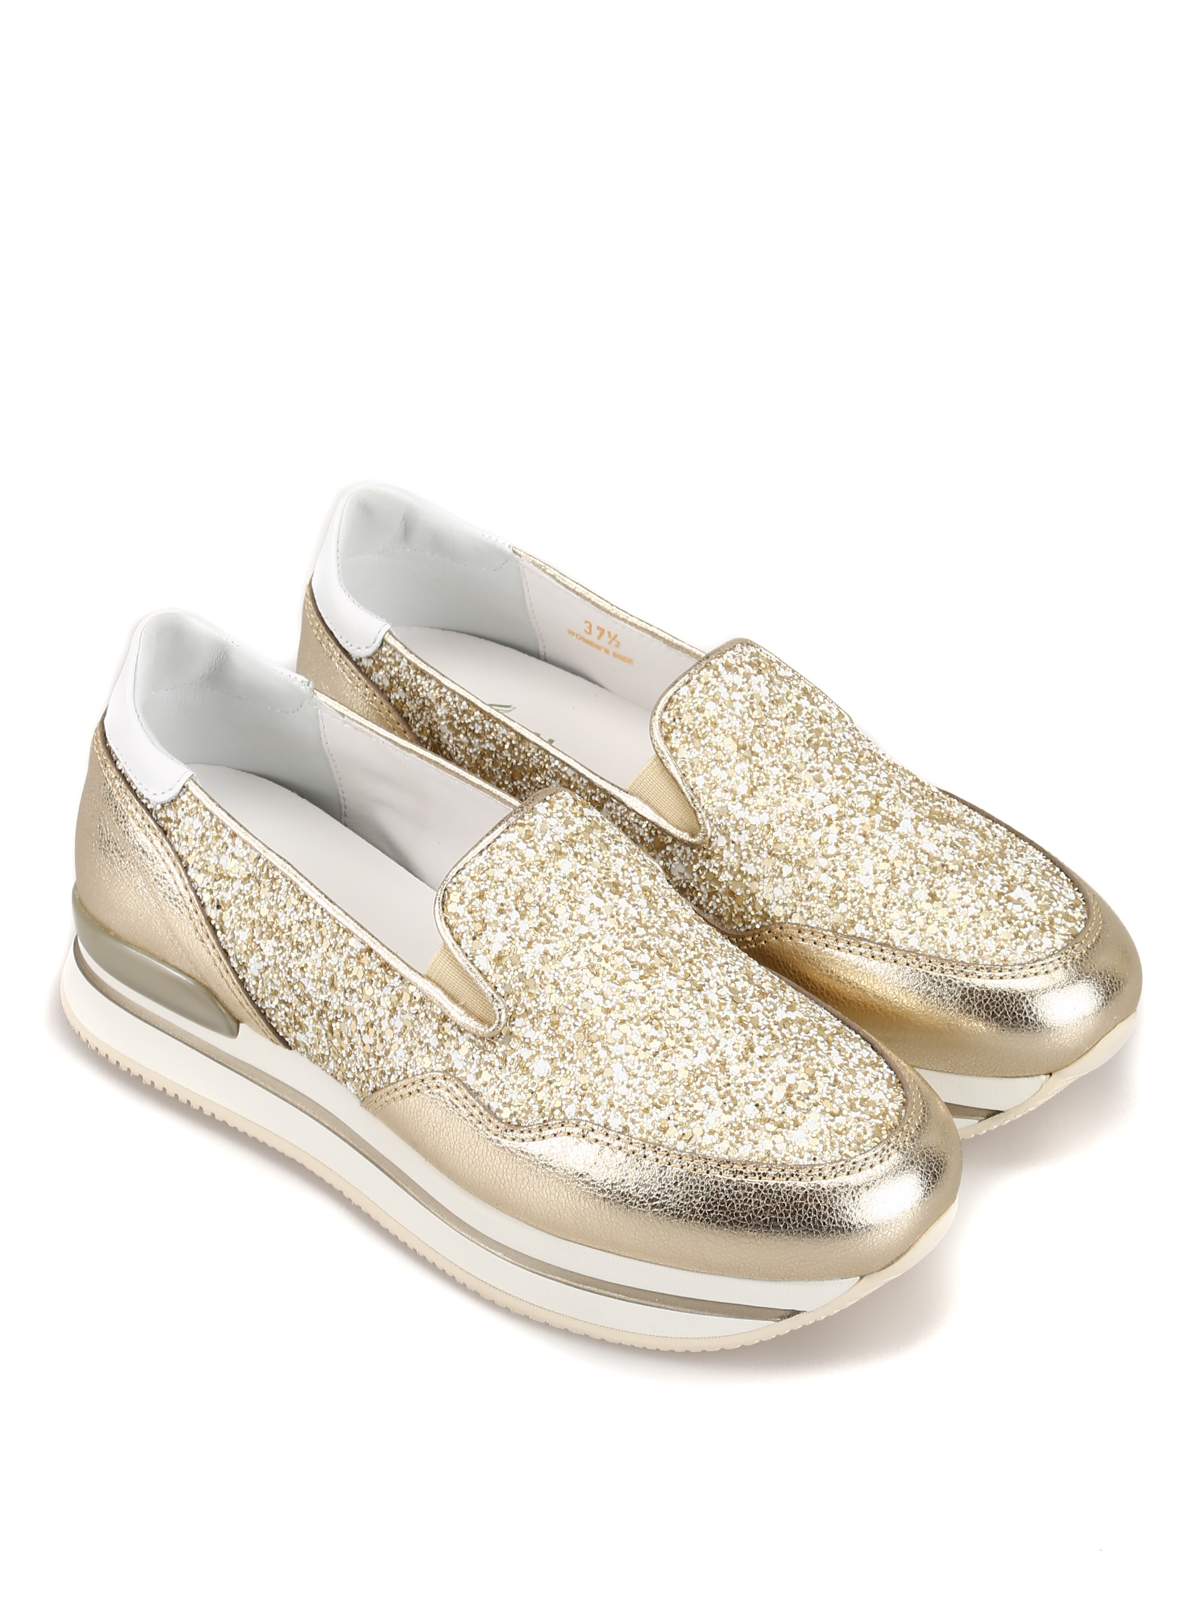 Trainers Hogan - H222 gold leather and glitter slip-ons ...